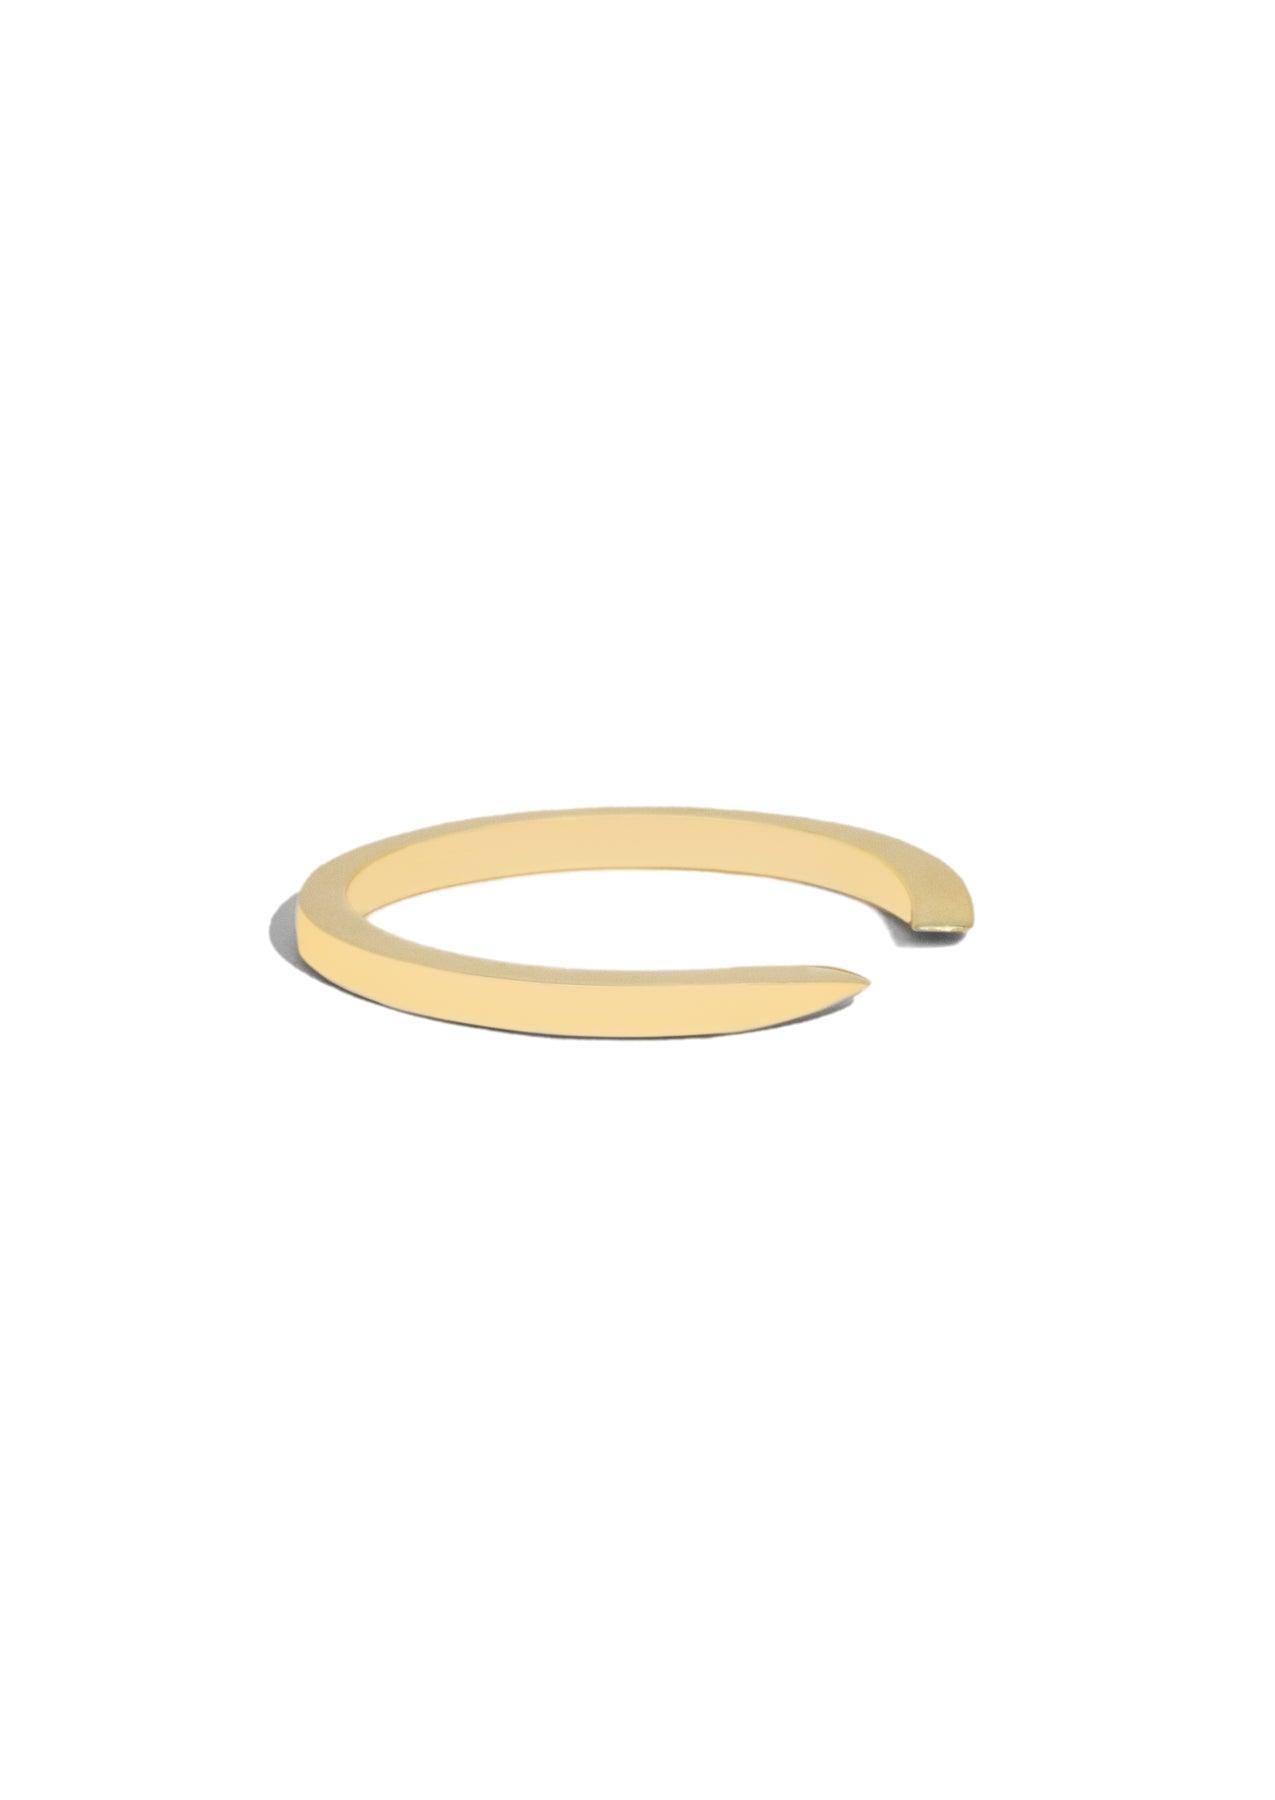 The Open Wedding Band Yellow Gold